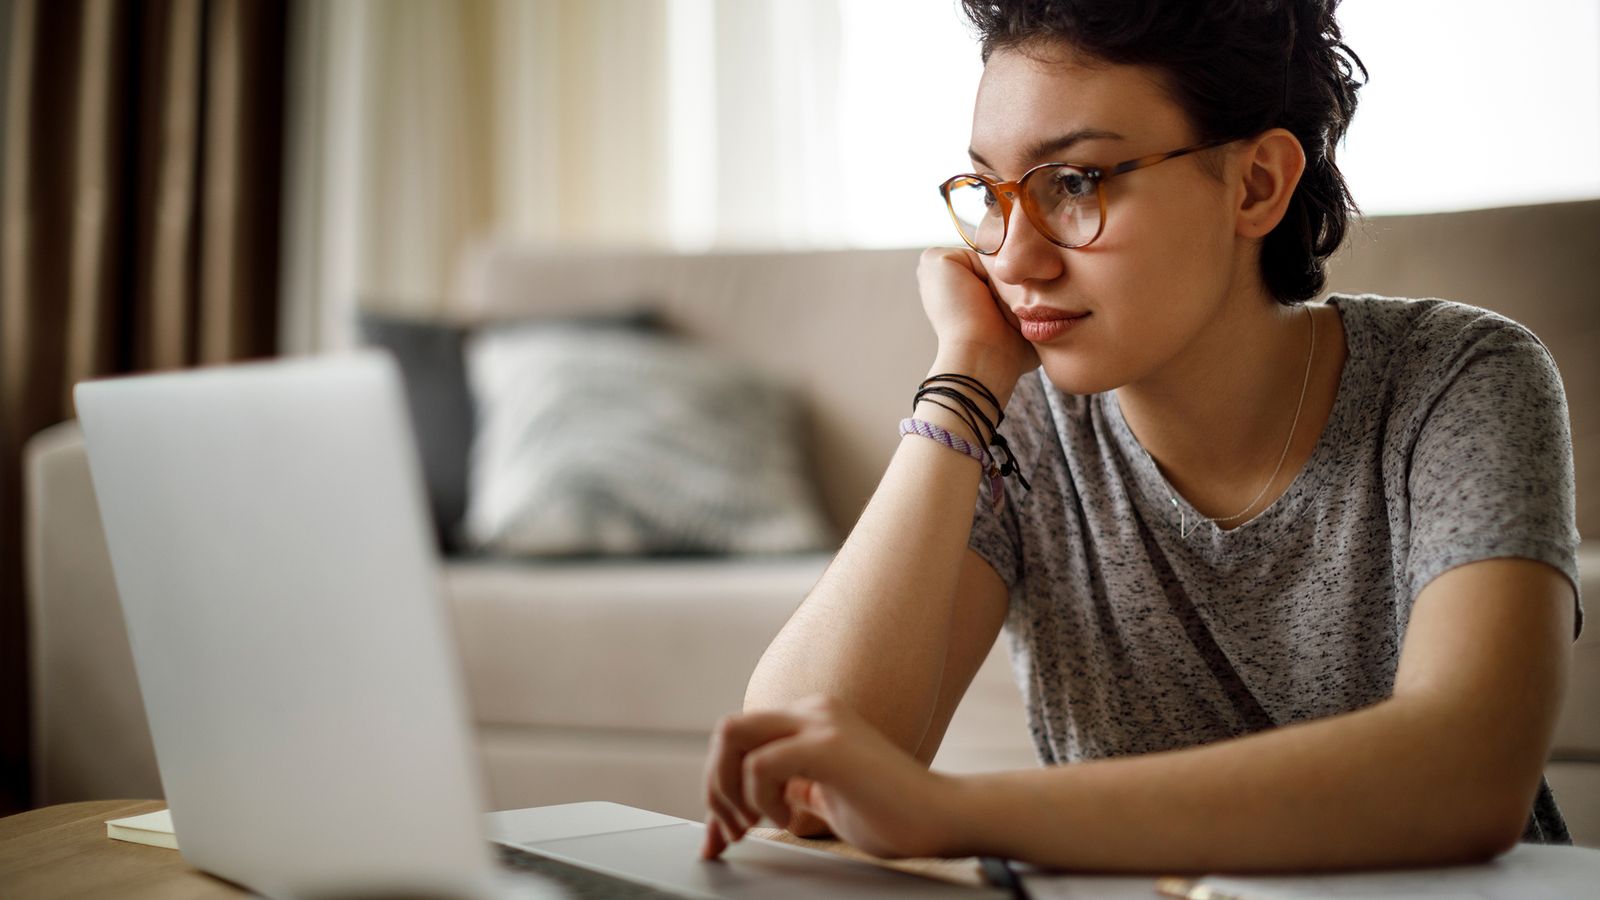 Young woman is sitting in front of a laptop